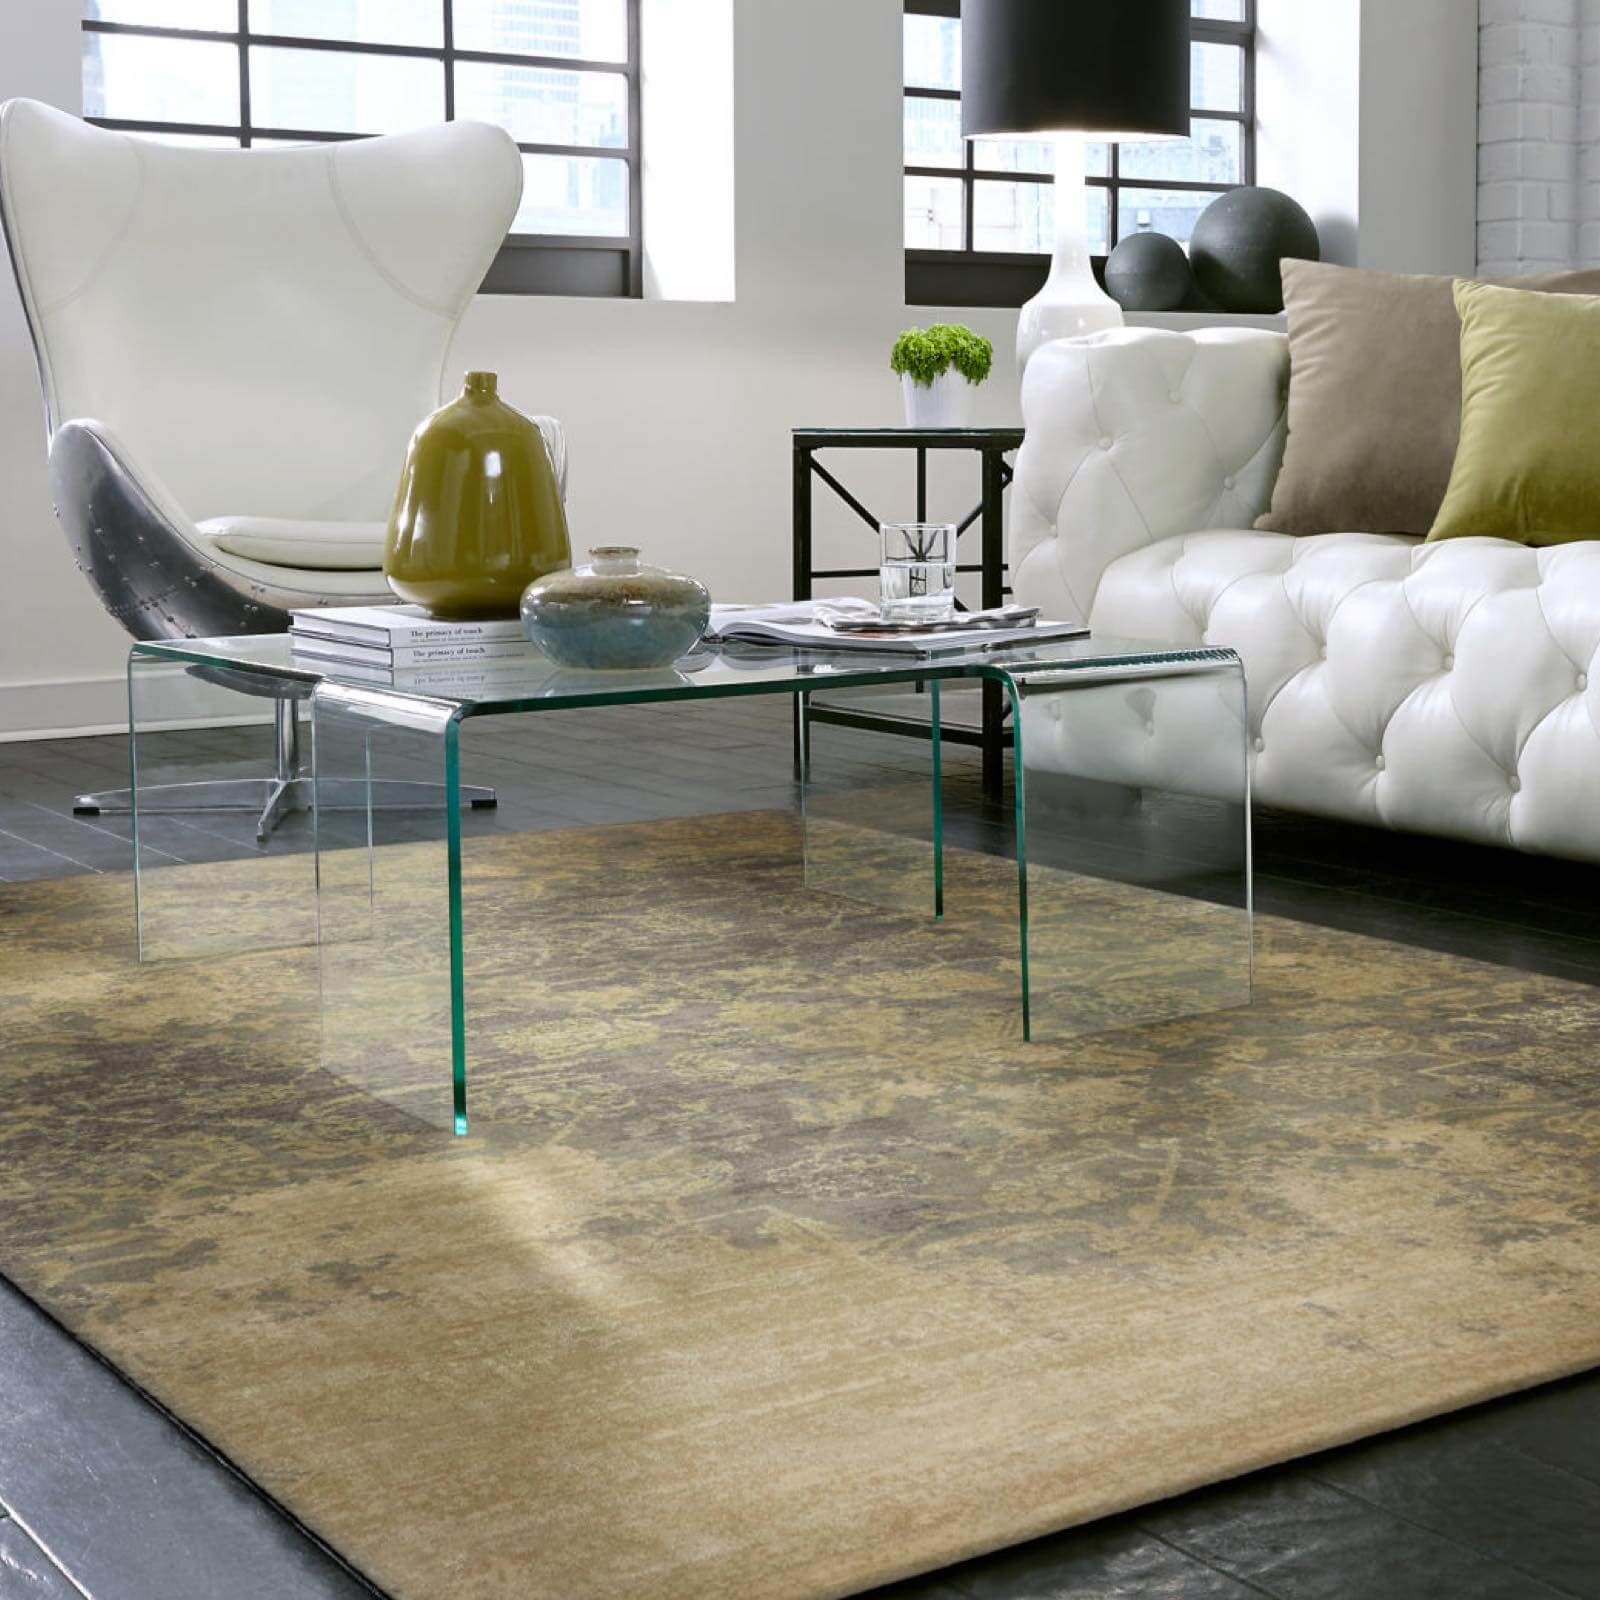 Area rug | Blair Mill Outlet